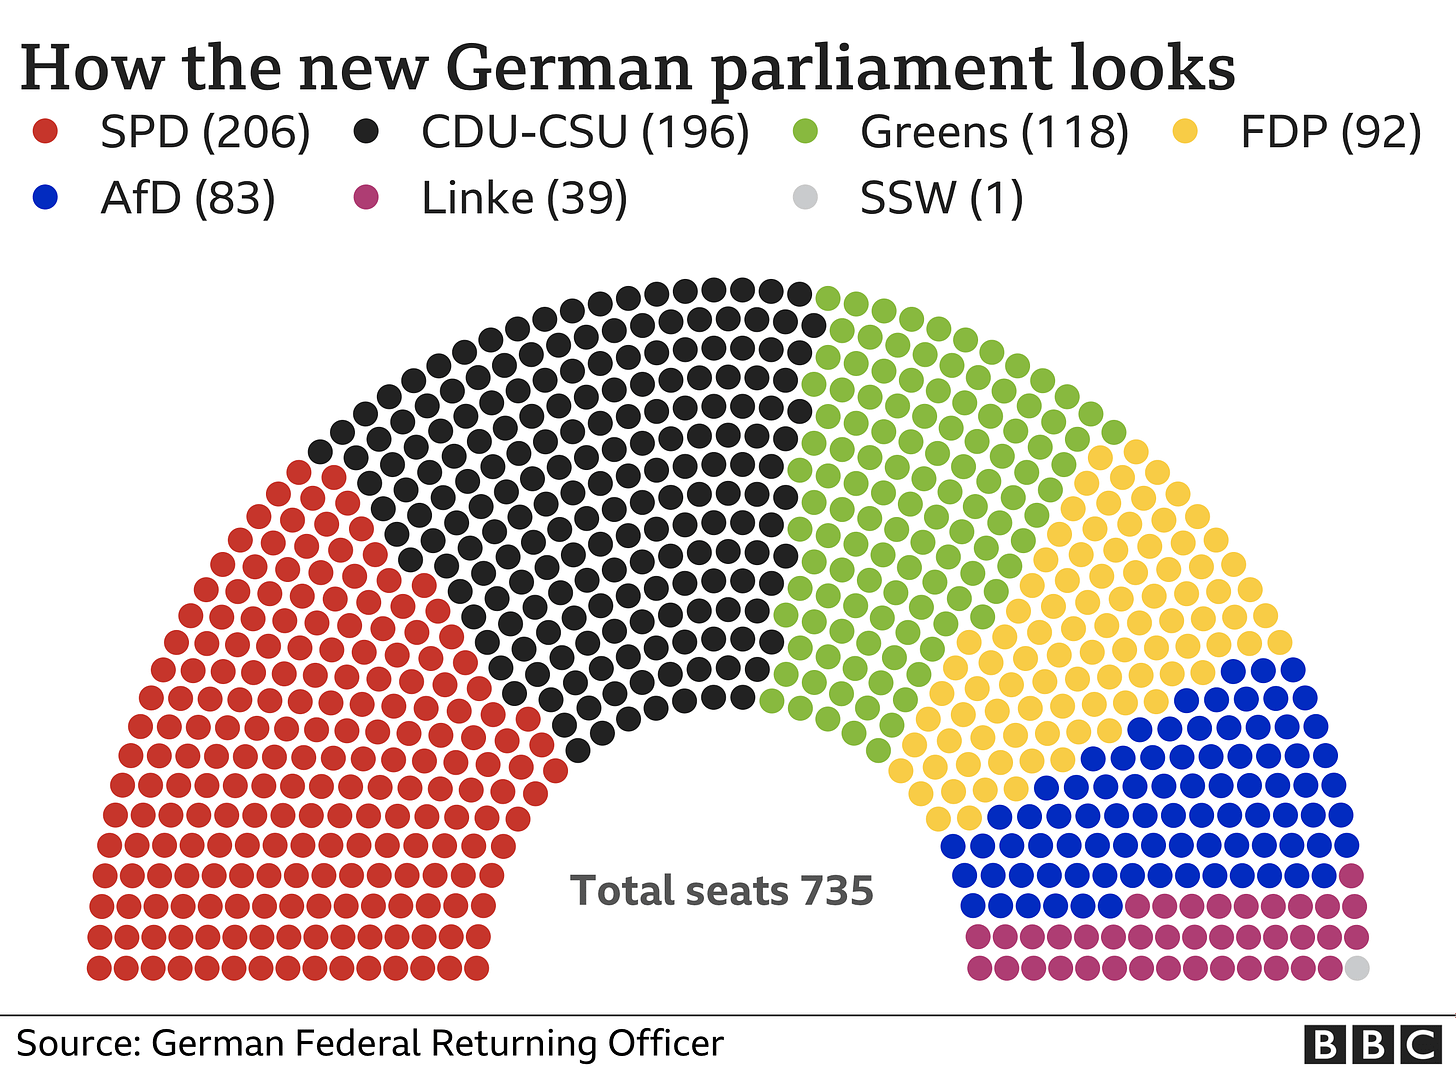 Distribution of seats - provisional results